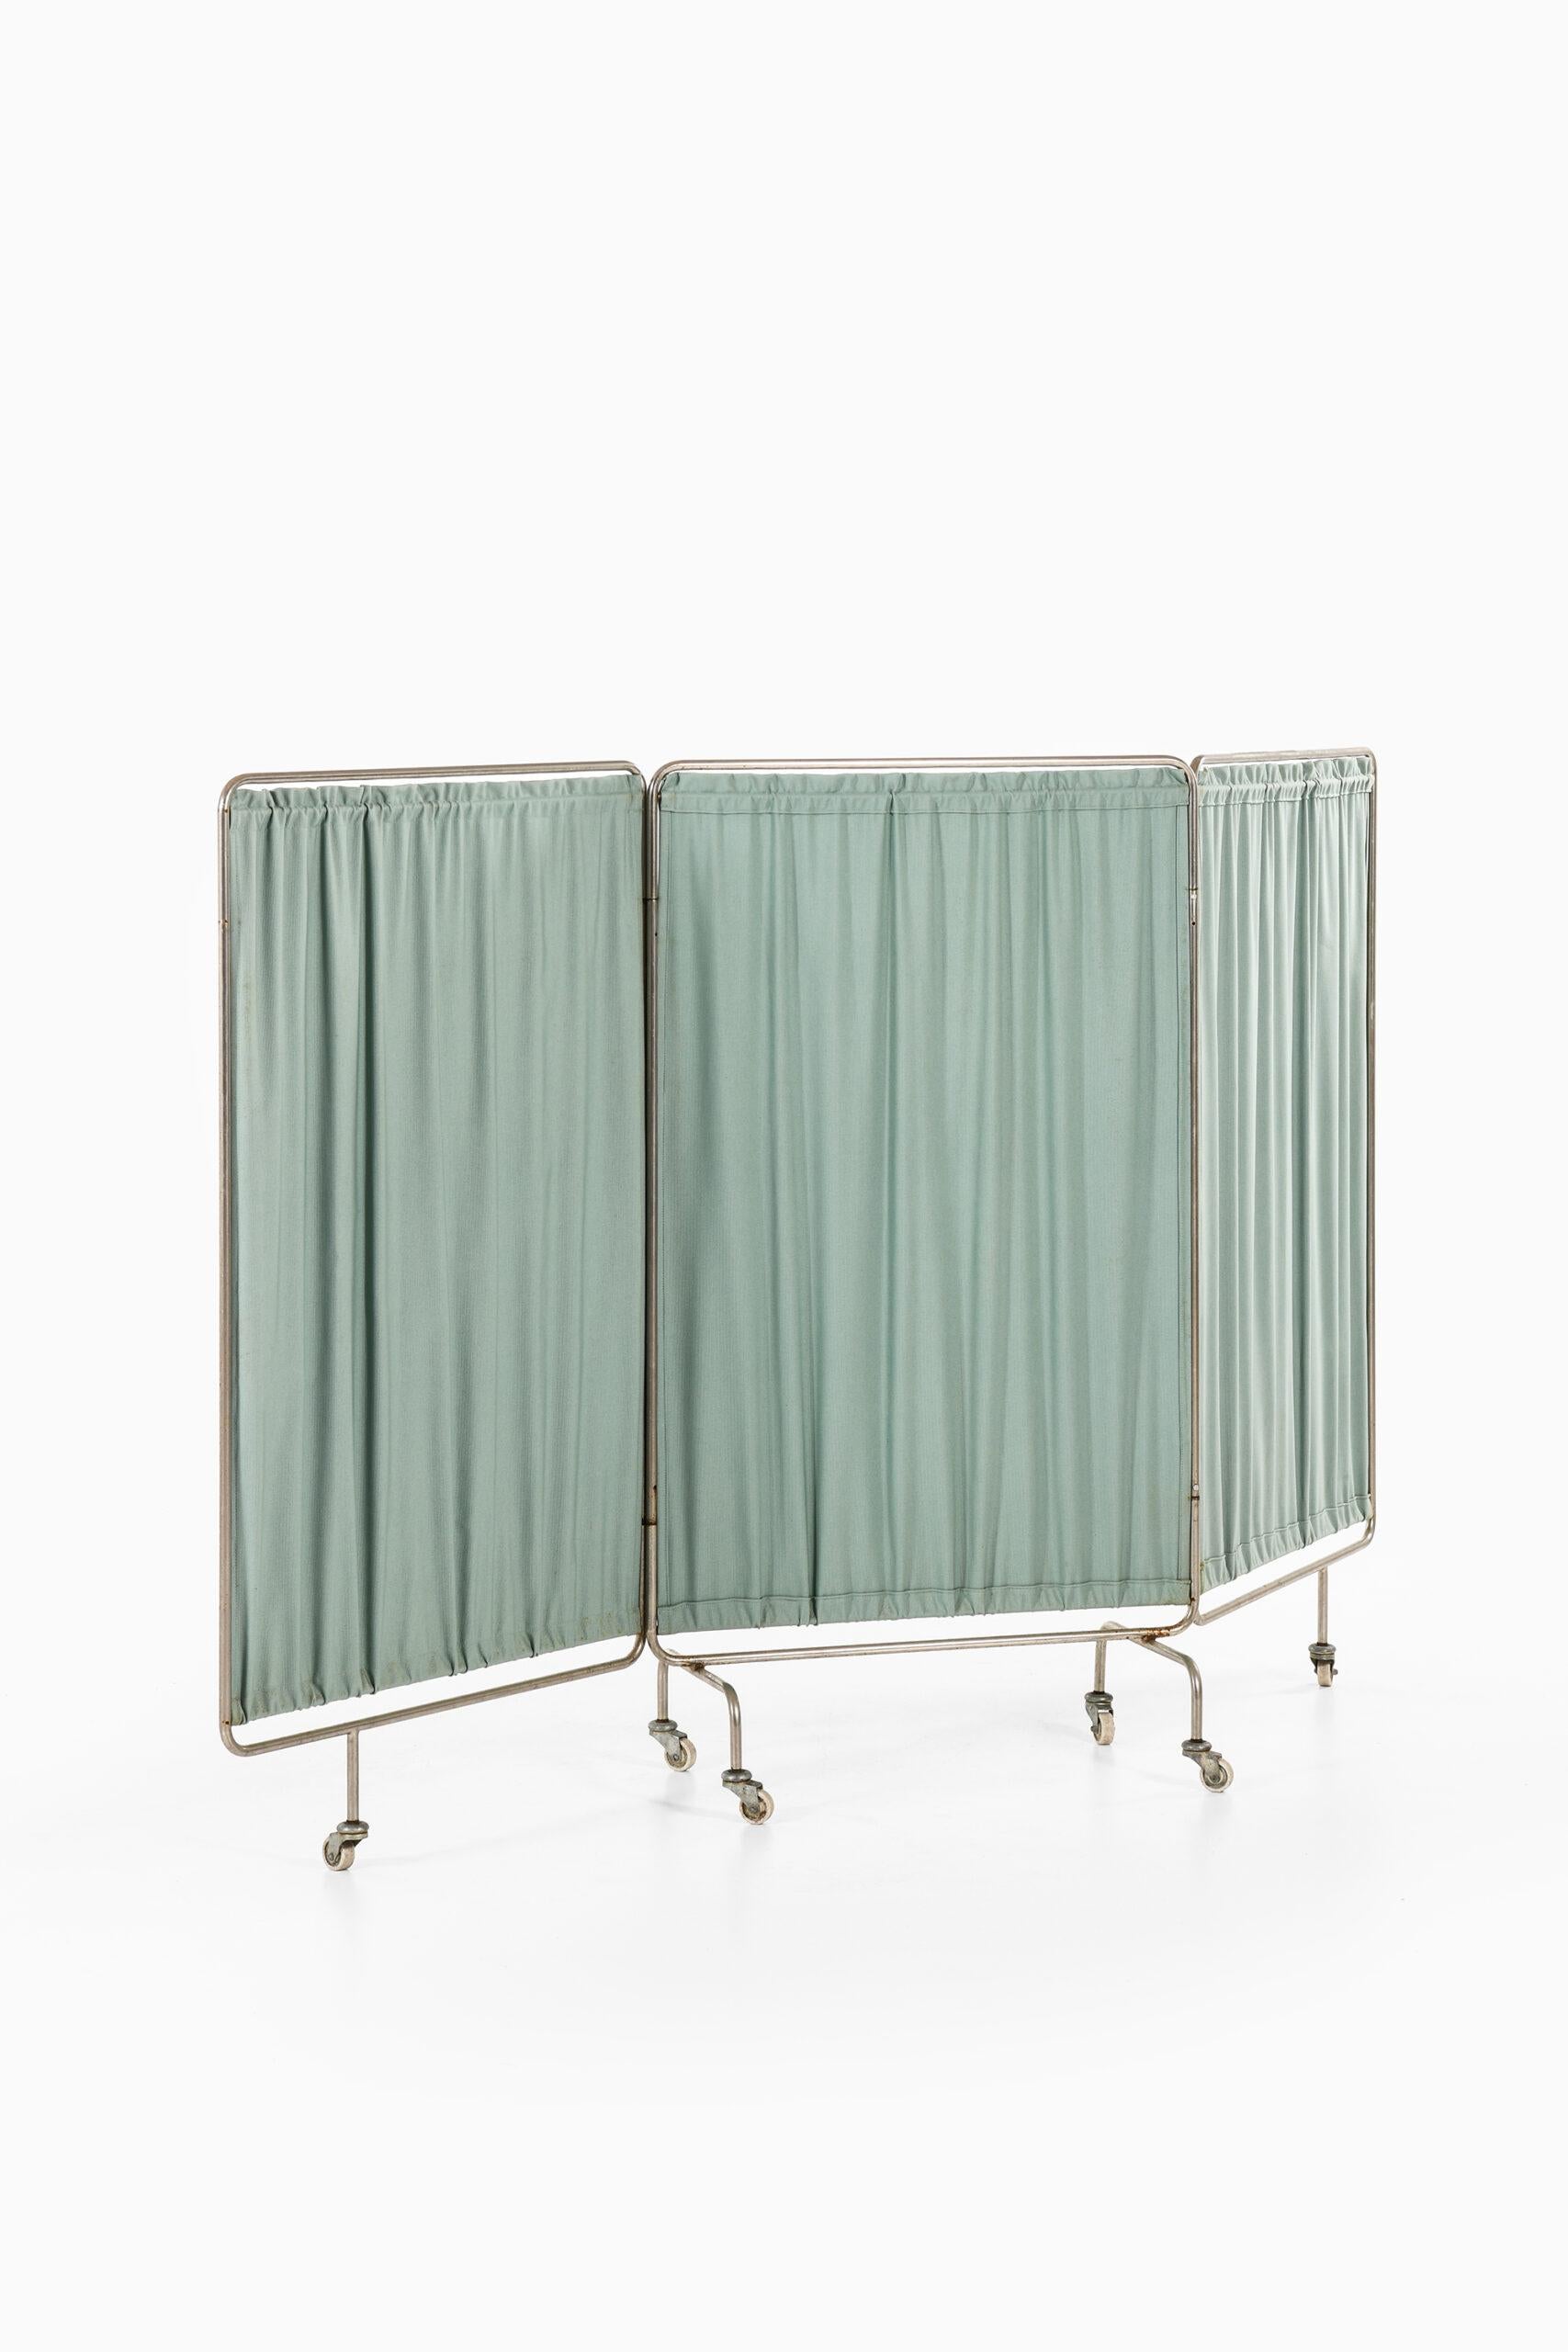 Room divider on wheels. Produced in Sweden.
Dimensions (W x D x H): 85 ( 255 ) x 45 x 148 cm.